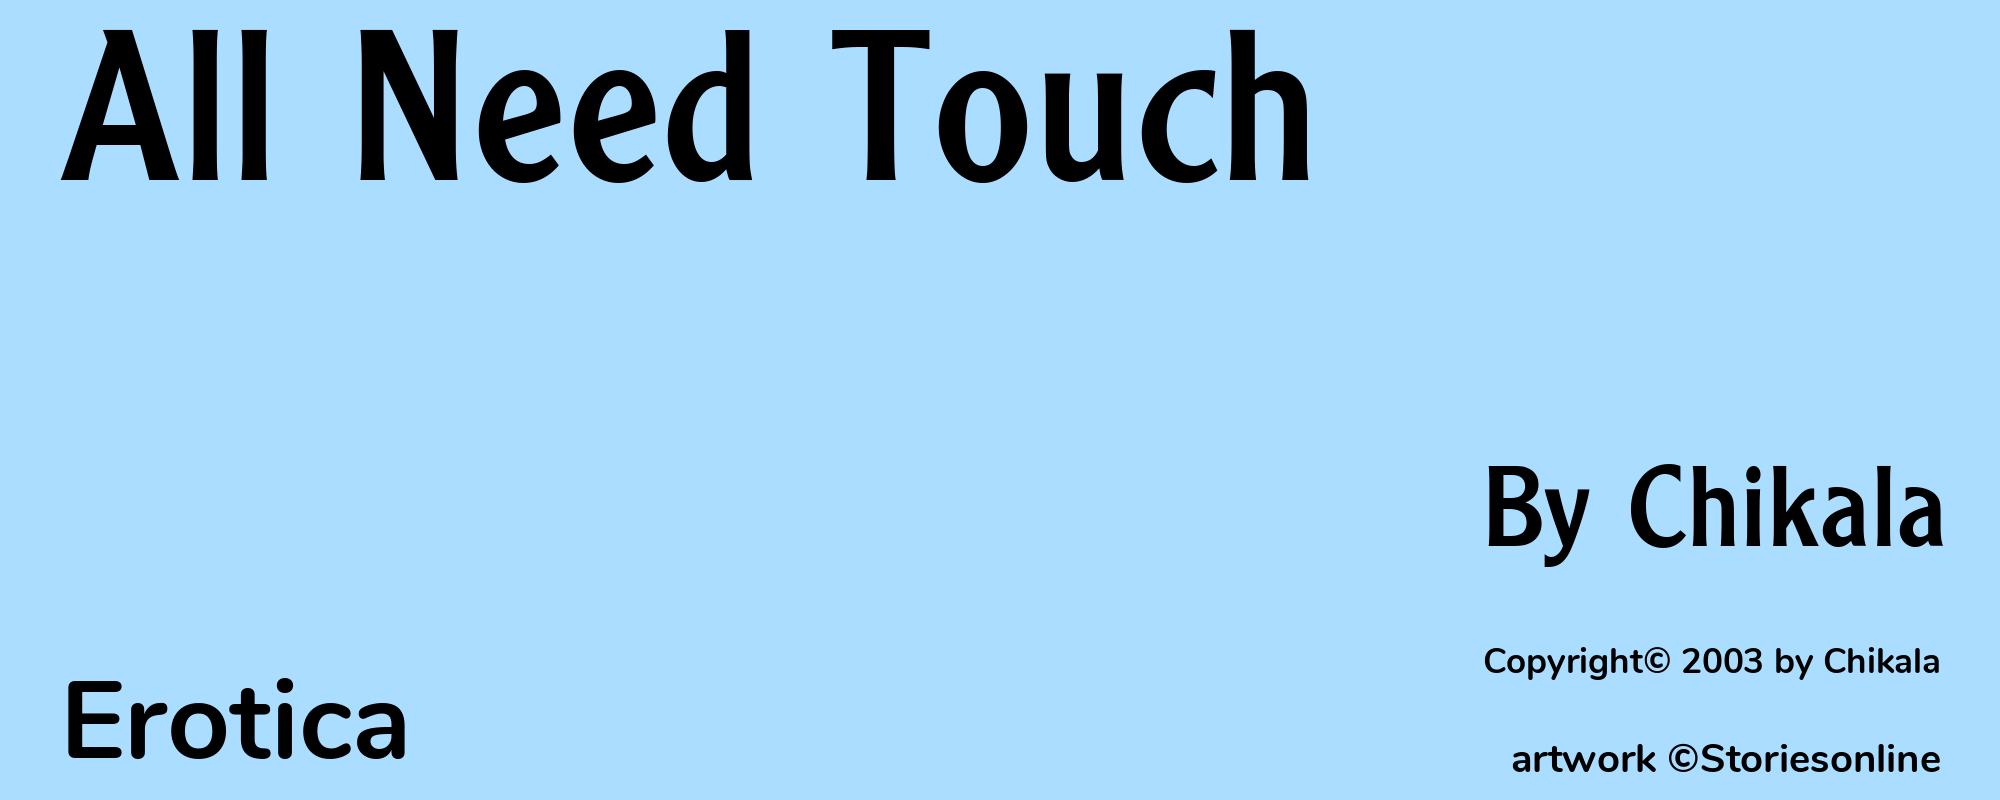 All Need Touch - Cover